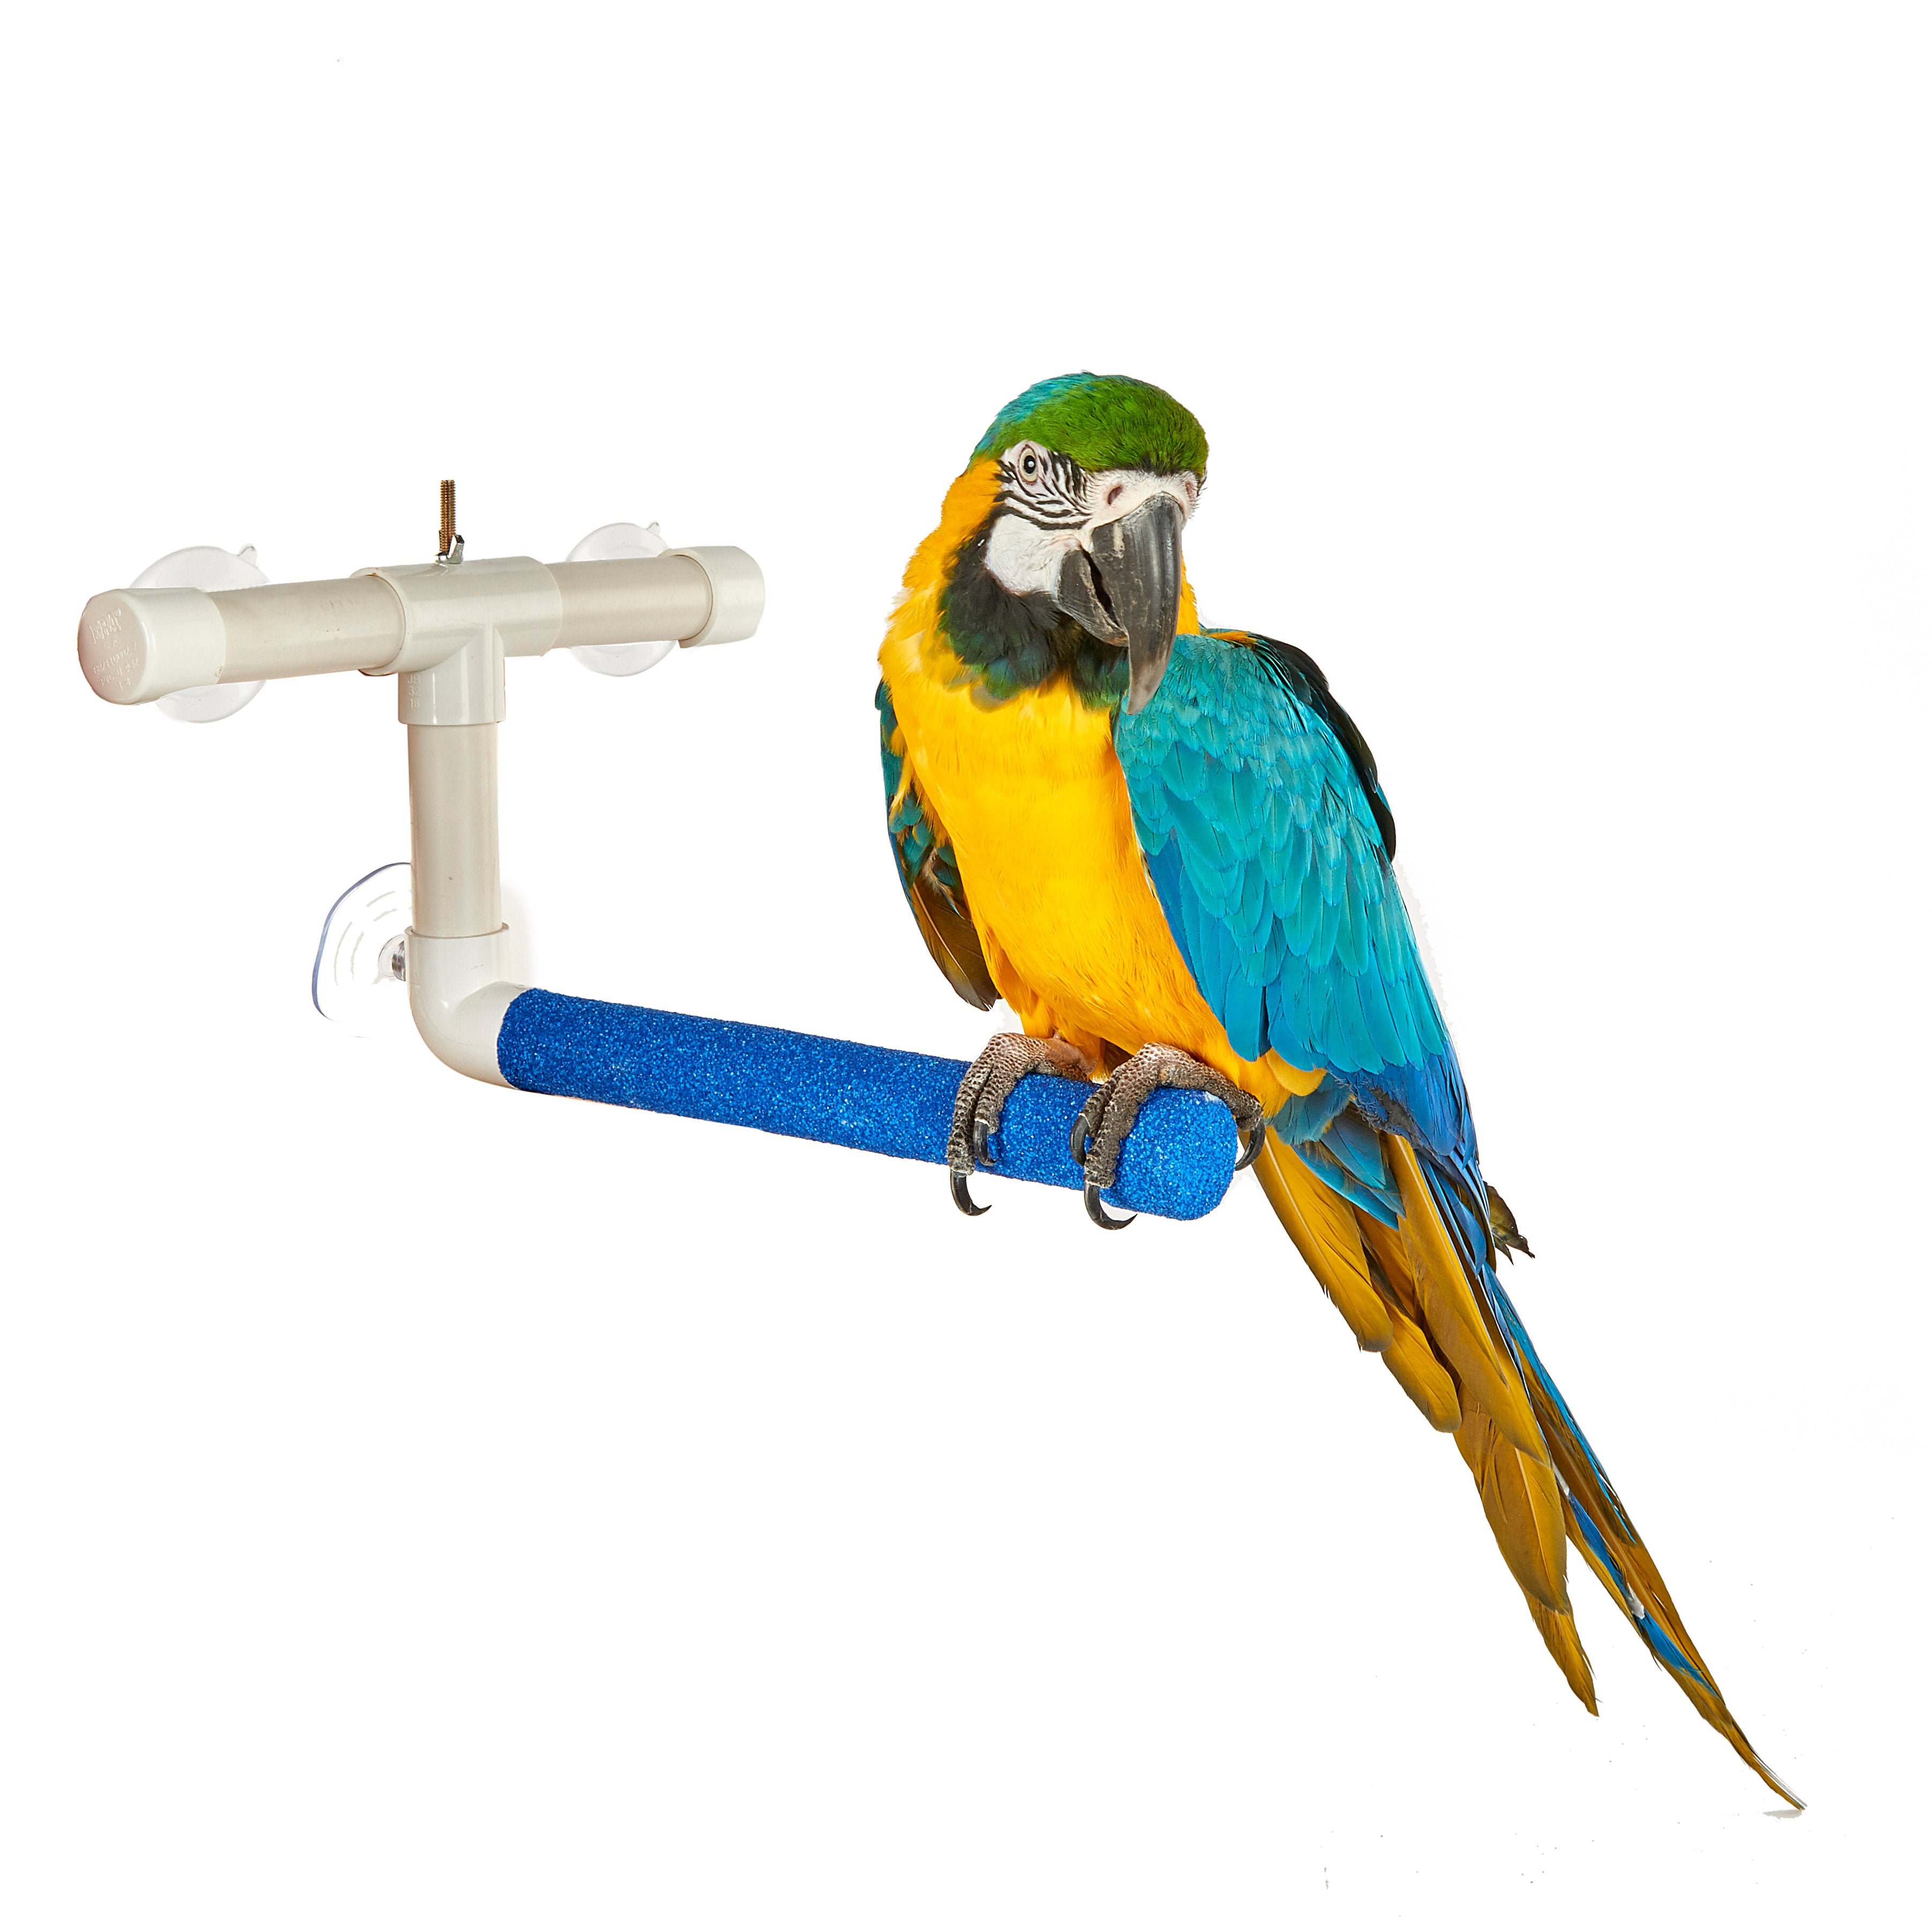 Bird Perches: Wooden, Corner, Heated, Shower and Rope Perches